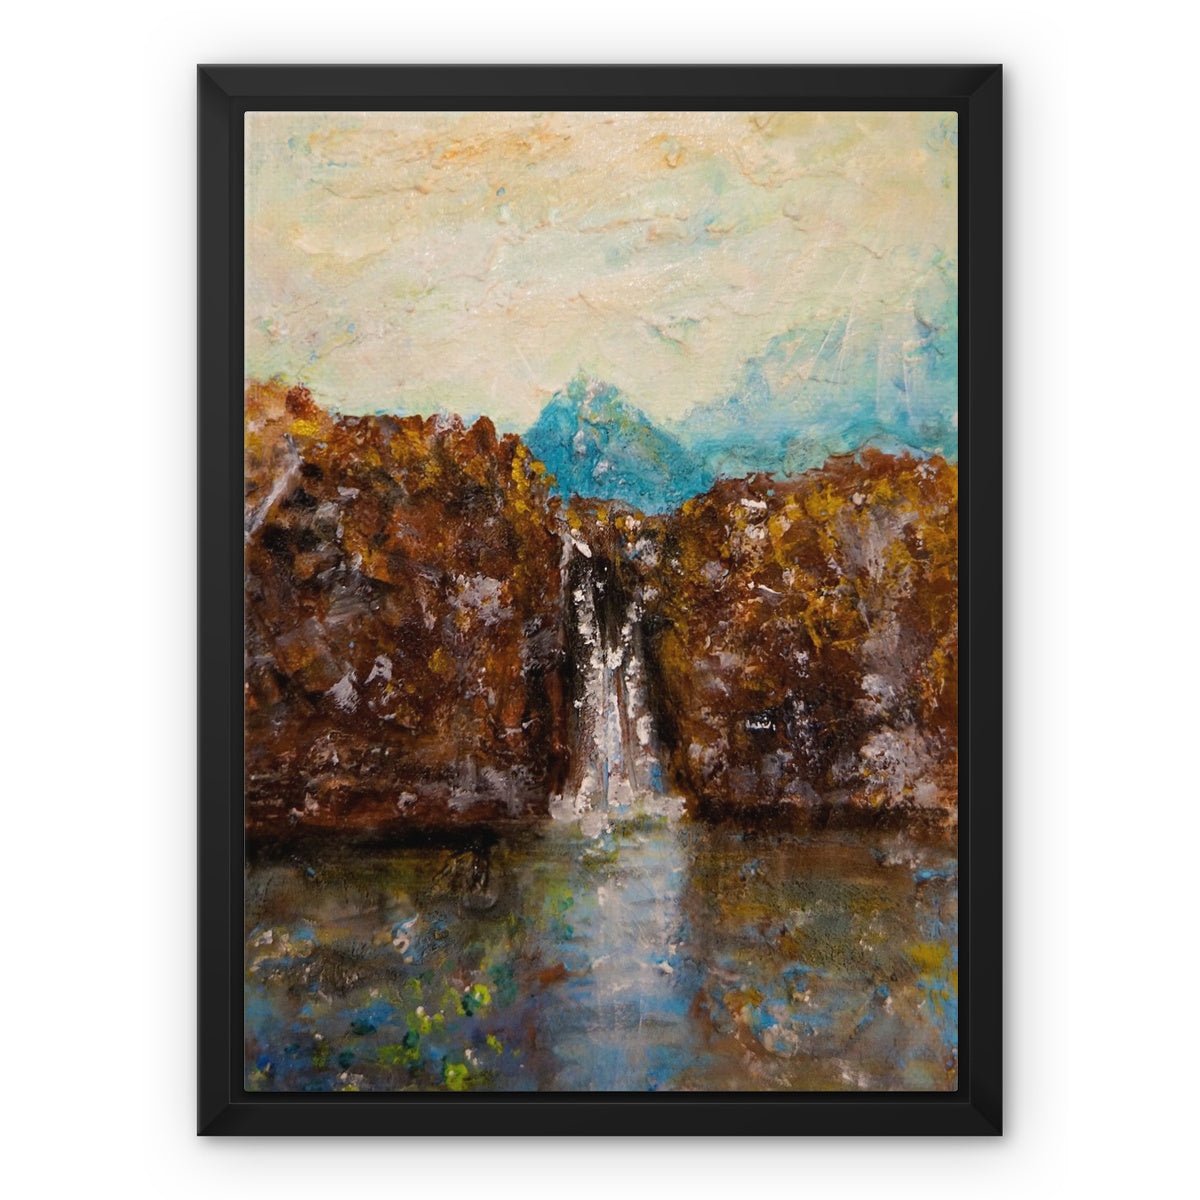 Skye Fairy Pools Painting | Framed Canvas From Scotland-Floating Framed Canvas Prints-Skye Art Gallery-12"x16"-Black Frame-Paintings, Prints, Homeware, Art Gifts From Scotland By Scottish Artist Kevin Hunter